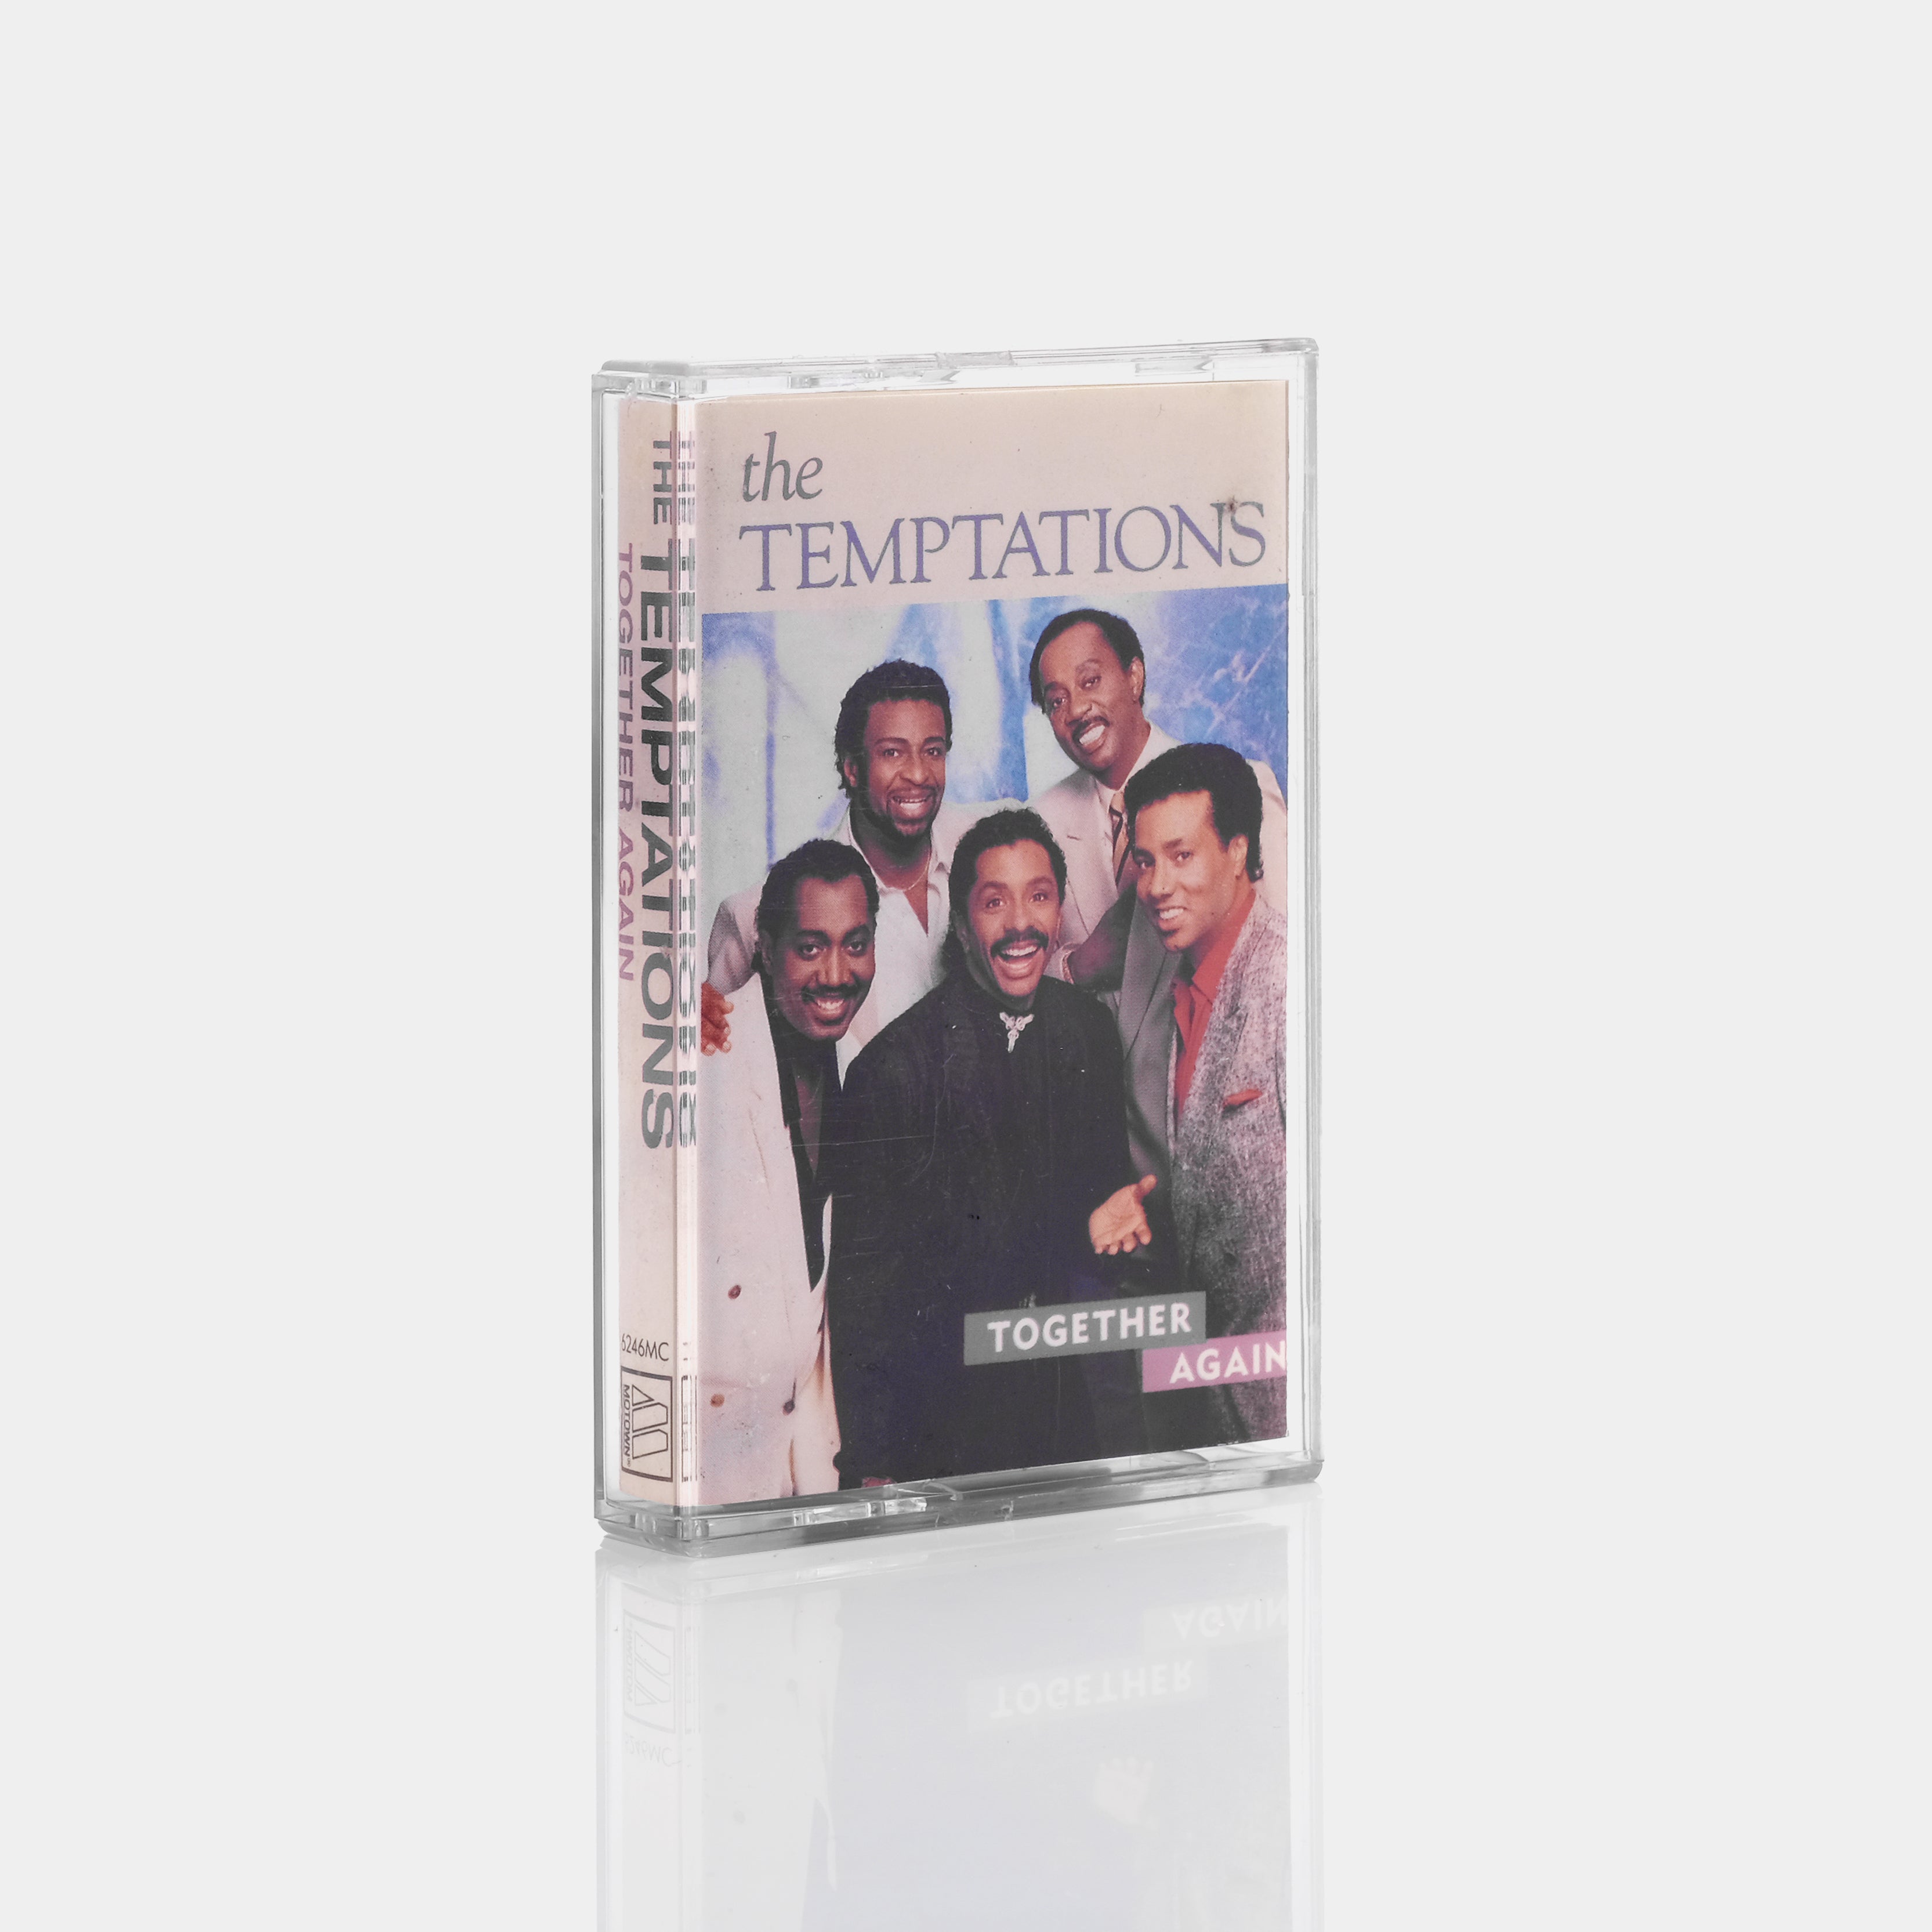 The Temptations - Together Again Cassette Tape